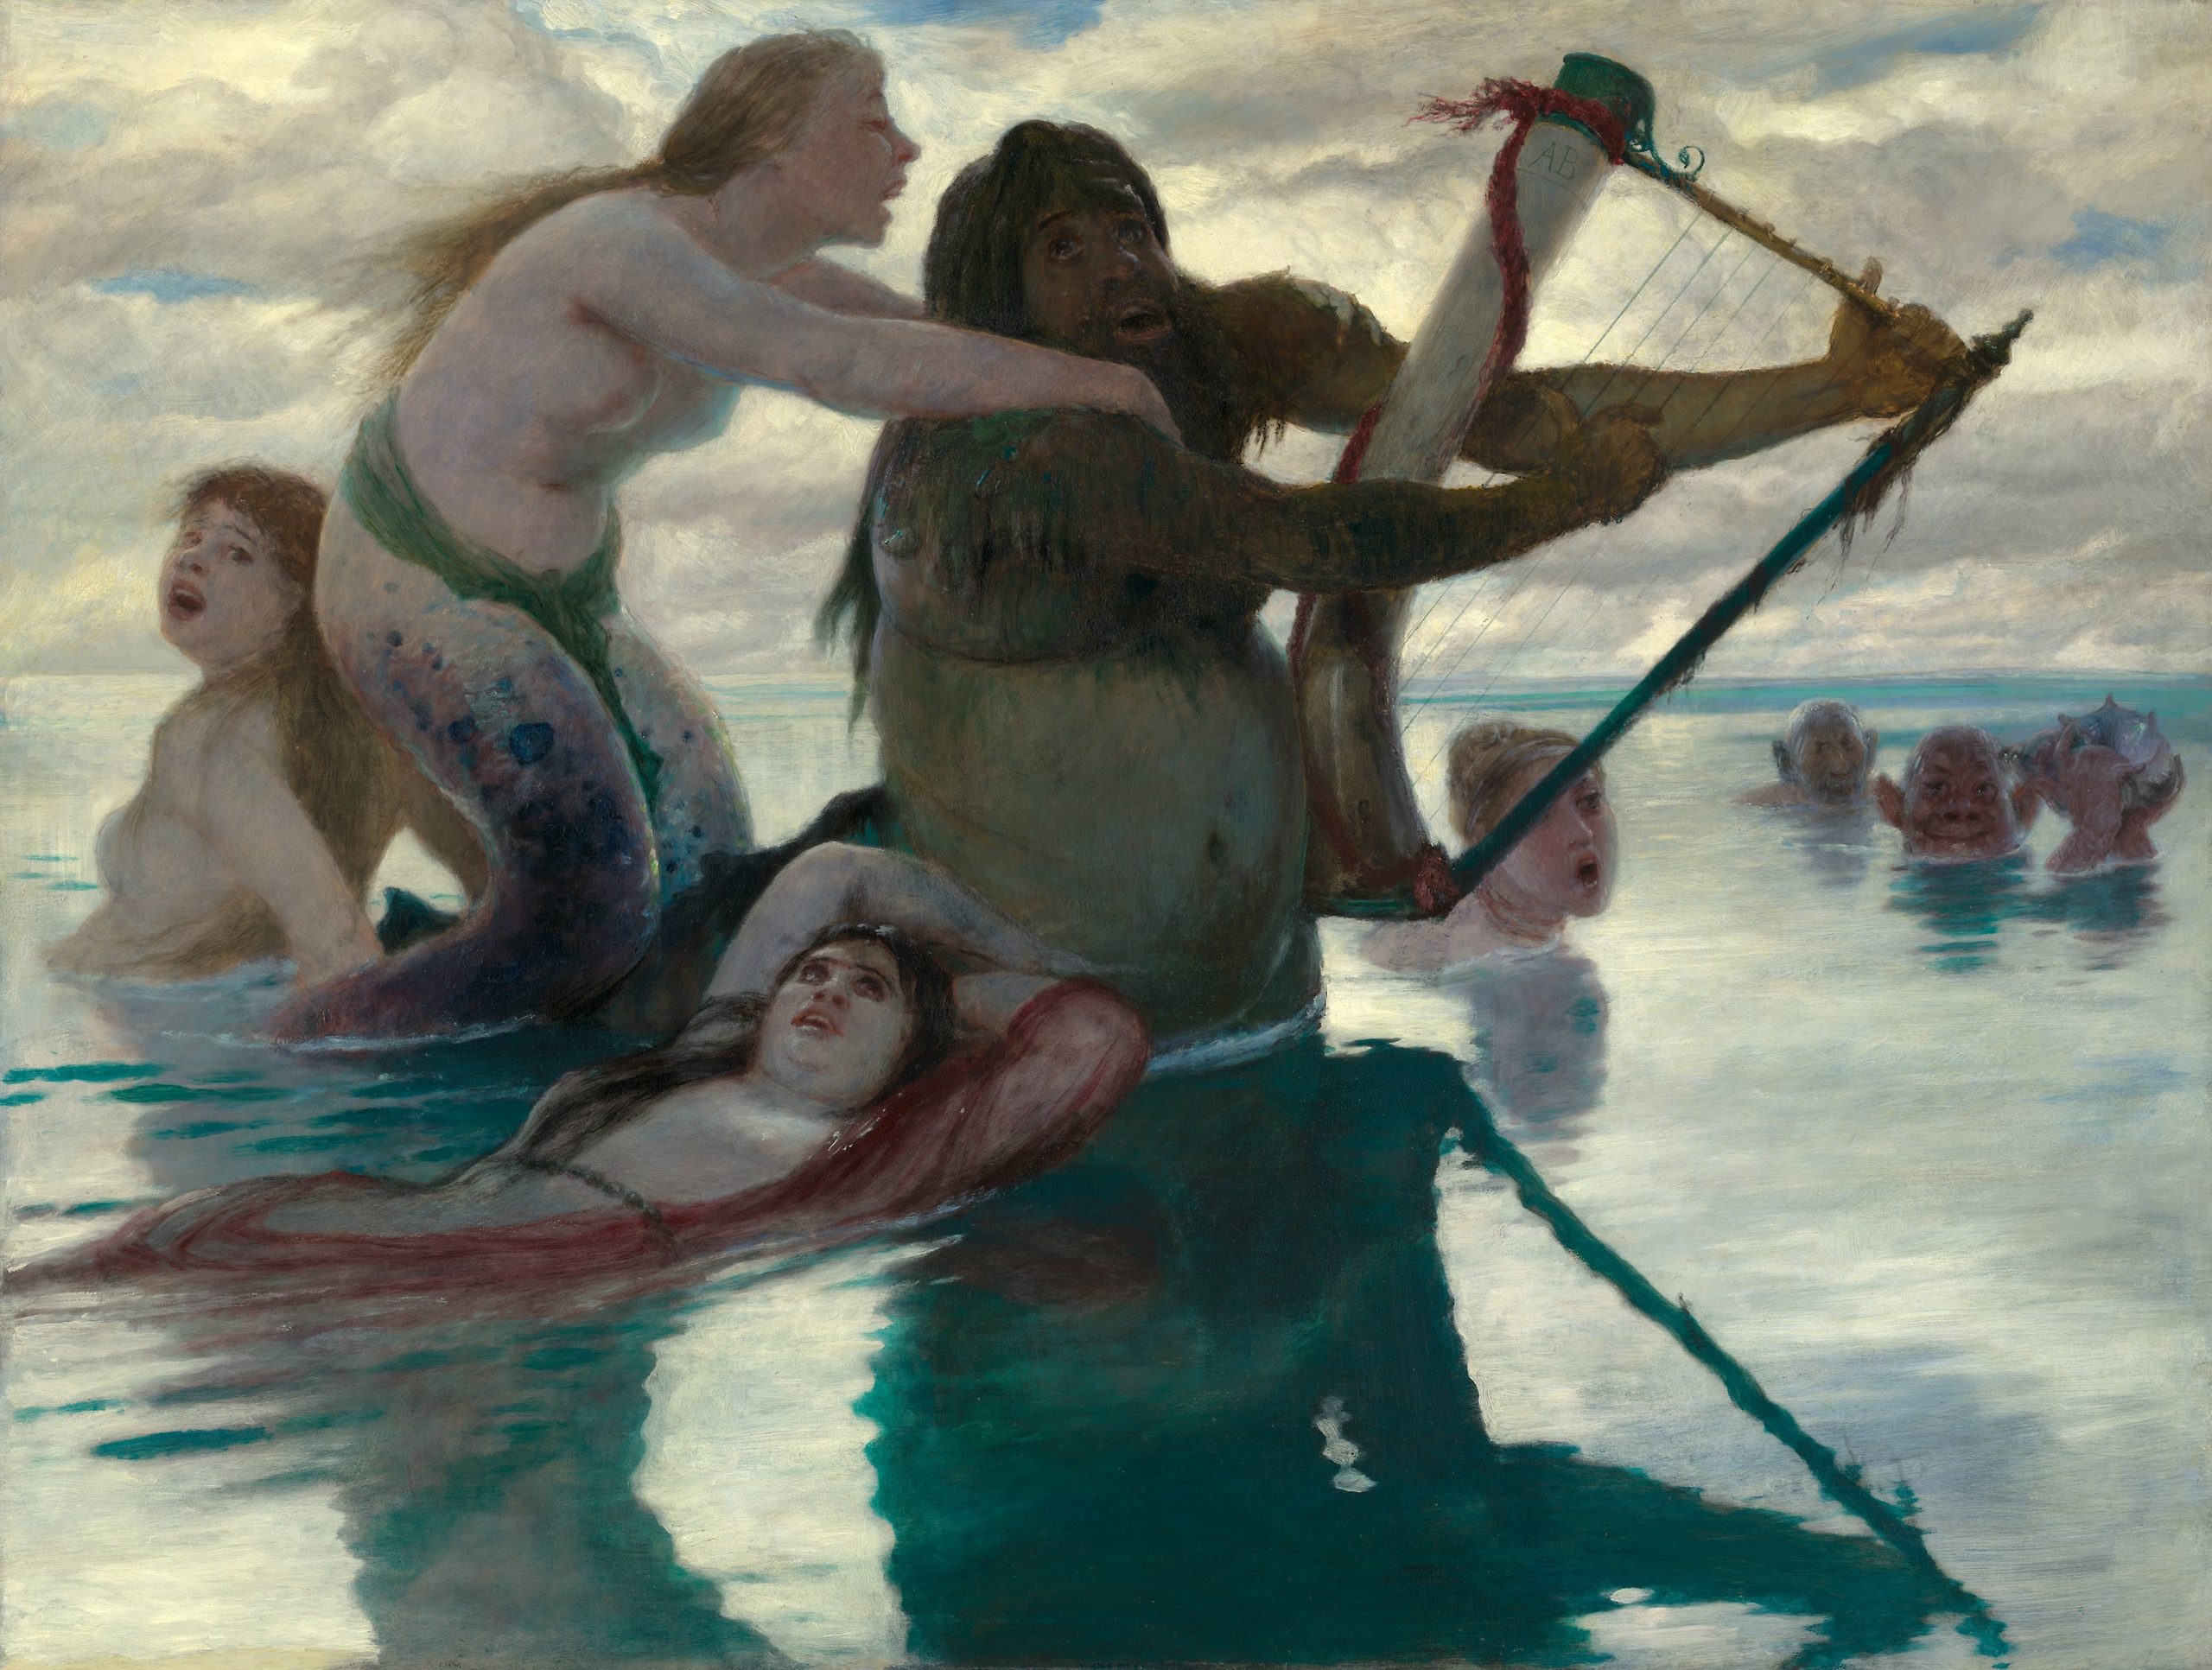 A group of mermaids play in the water, one of which holds an instrument.